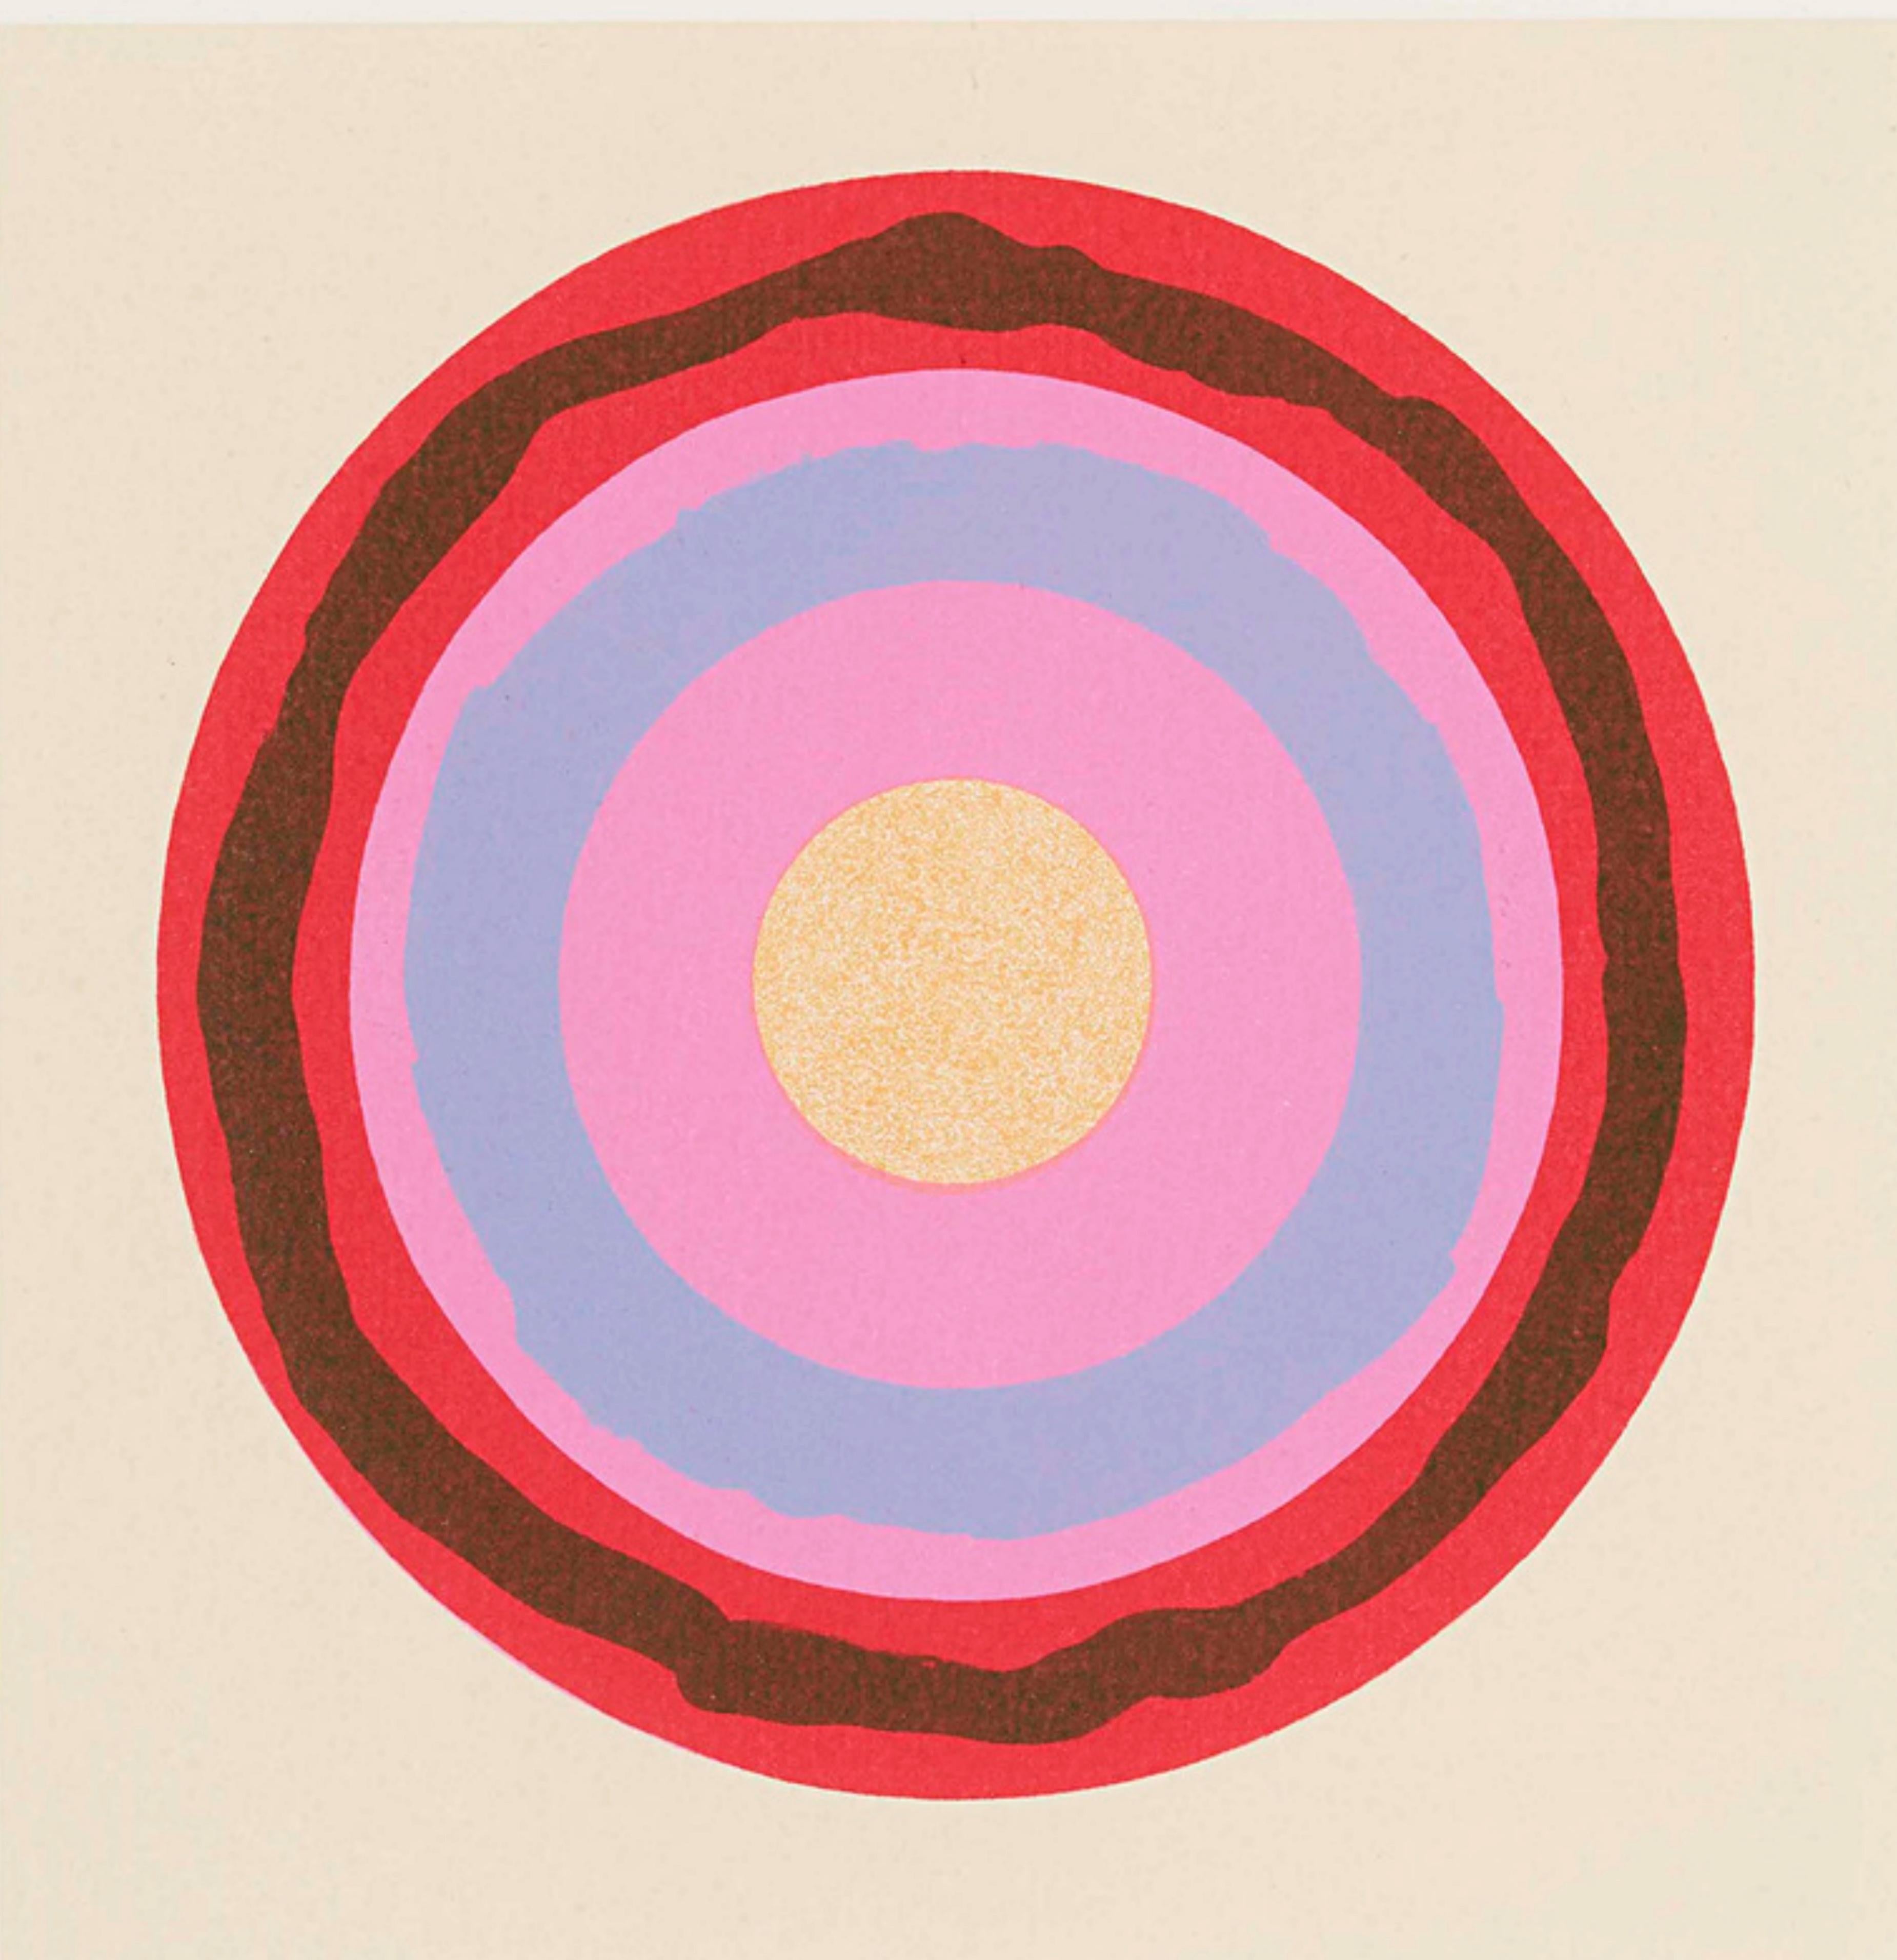 Kenneth Noland
Untitled Target, 2004
Lithograph on hand made paper with deckled edges
Signed and numbered from the limited edition of 75 on the lower front; bears the artist's blind stamp
Published by SOVA Food Pantry Charity, Los Angeles and